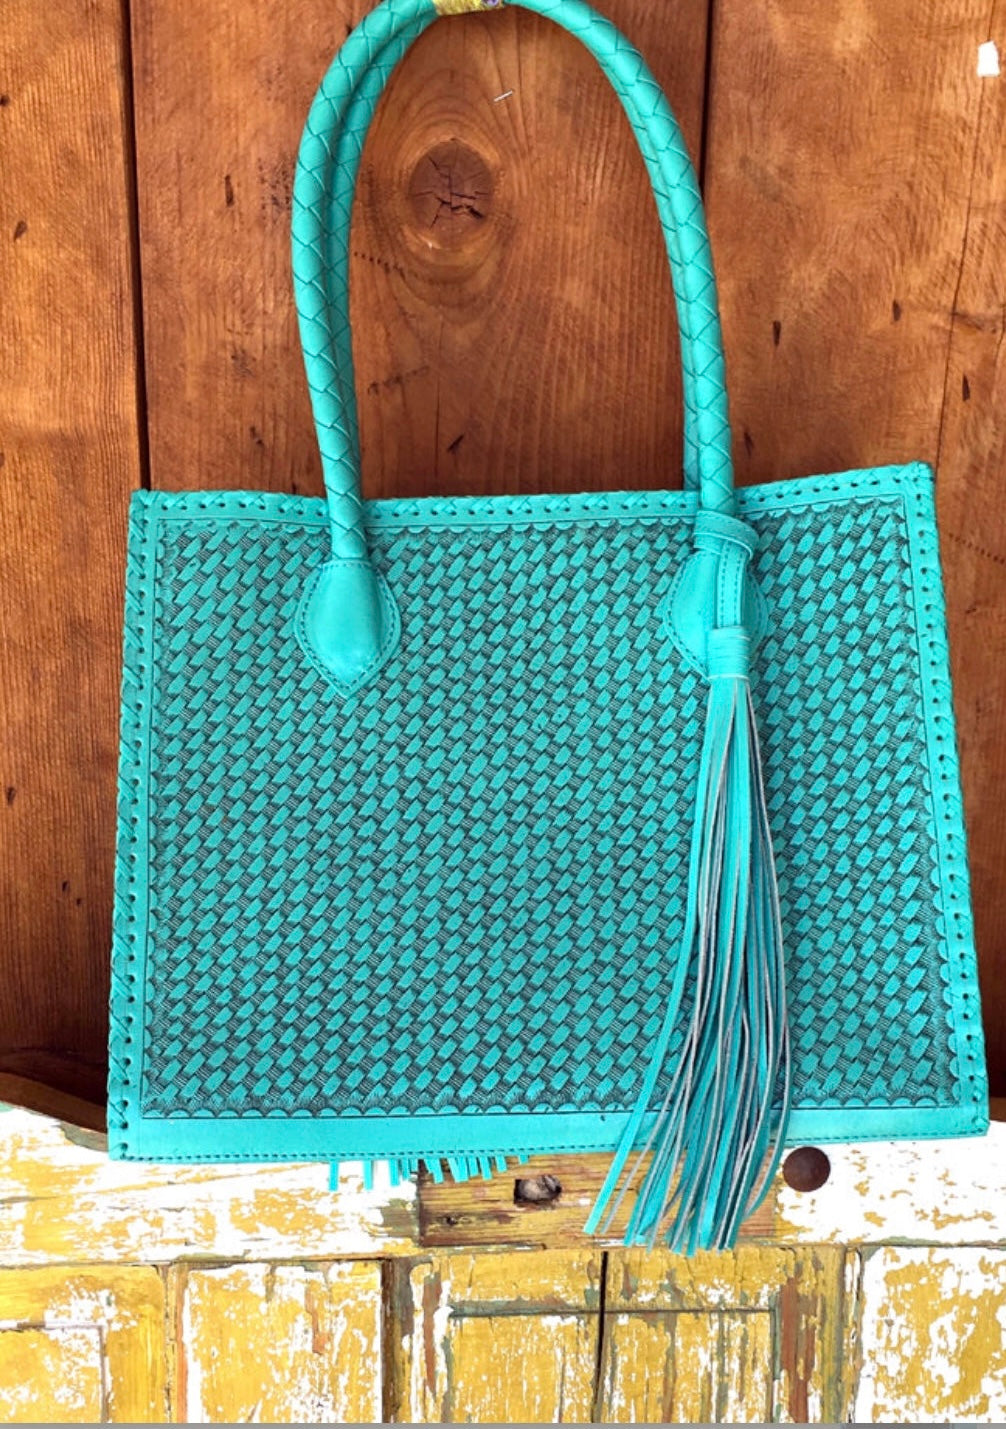 Turquoise tote bag